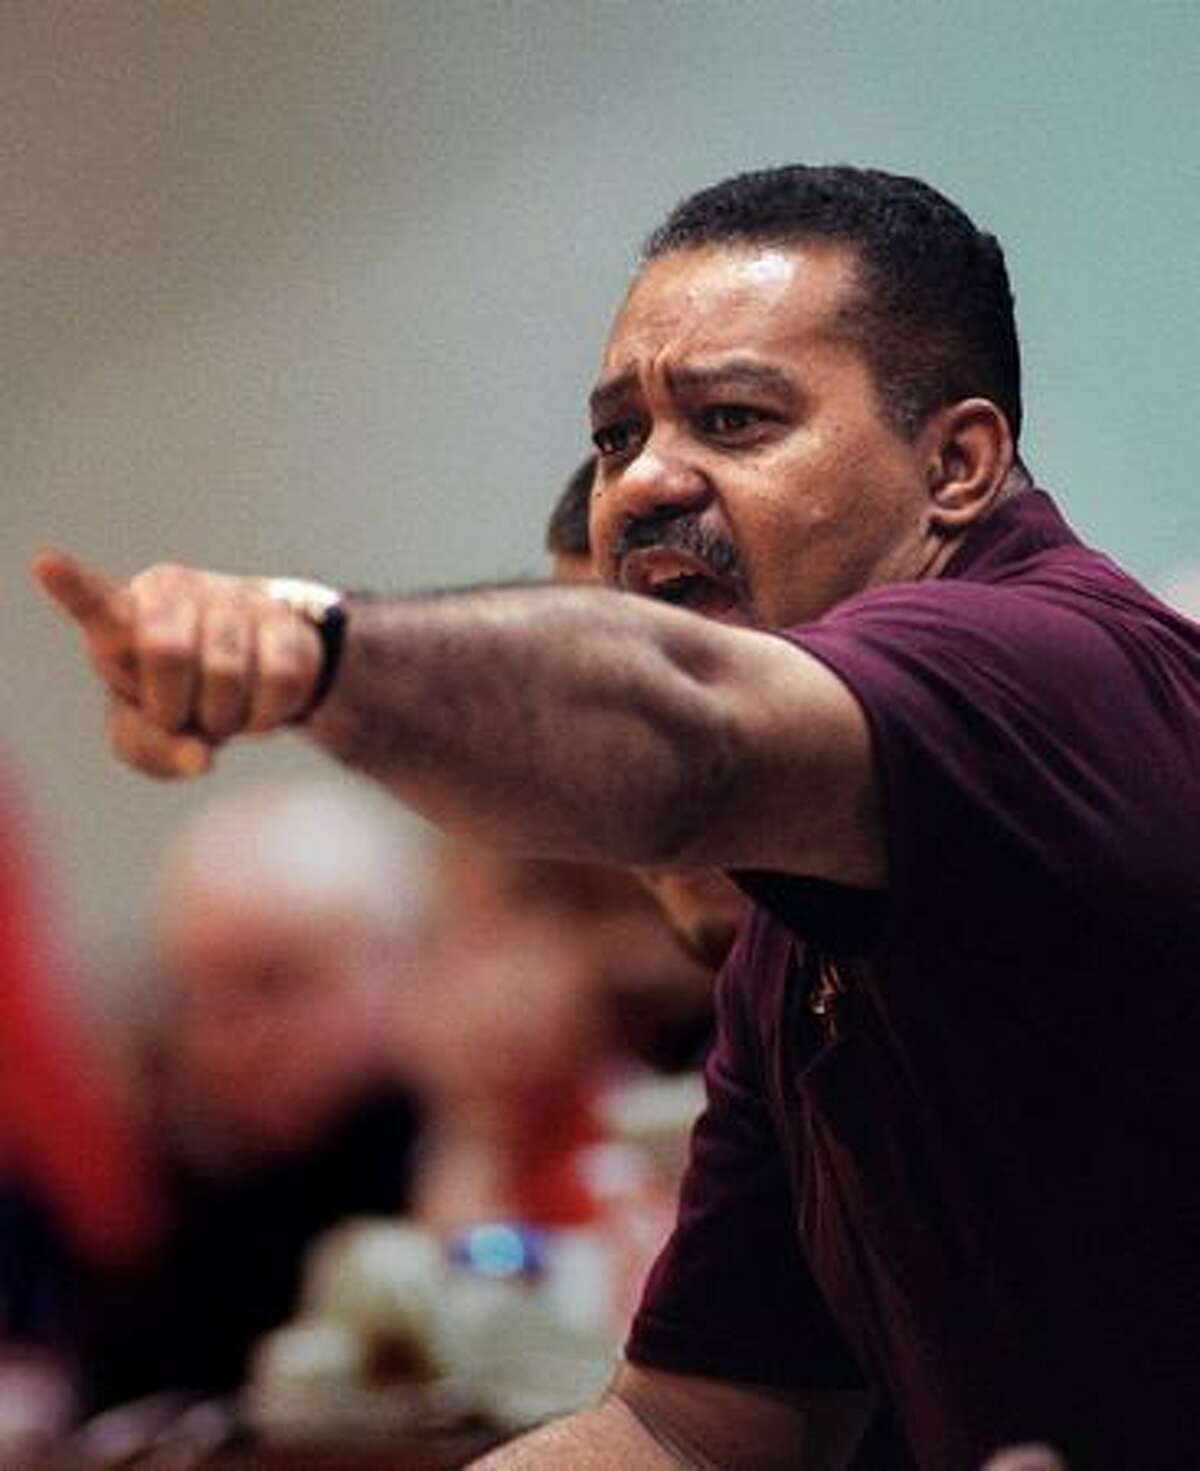 O'Dea basketball coach Phil Lumpkin yells to a player during the 1997 basketball championship tournament at Seattle Pacific University. O'Dea kept its perfect record intact and won the Sea-King District title that night, beating Cleveland 84-54. (Ellen M. Banner/seattlepi.com file)